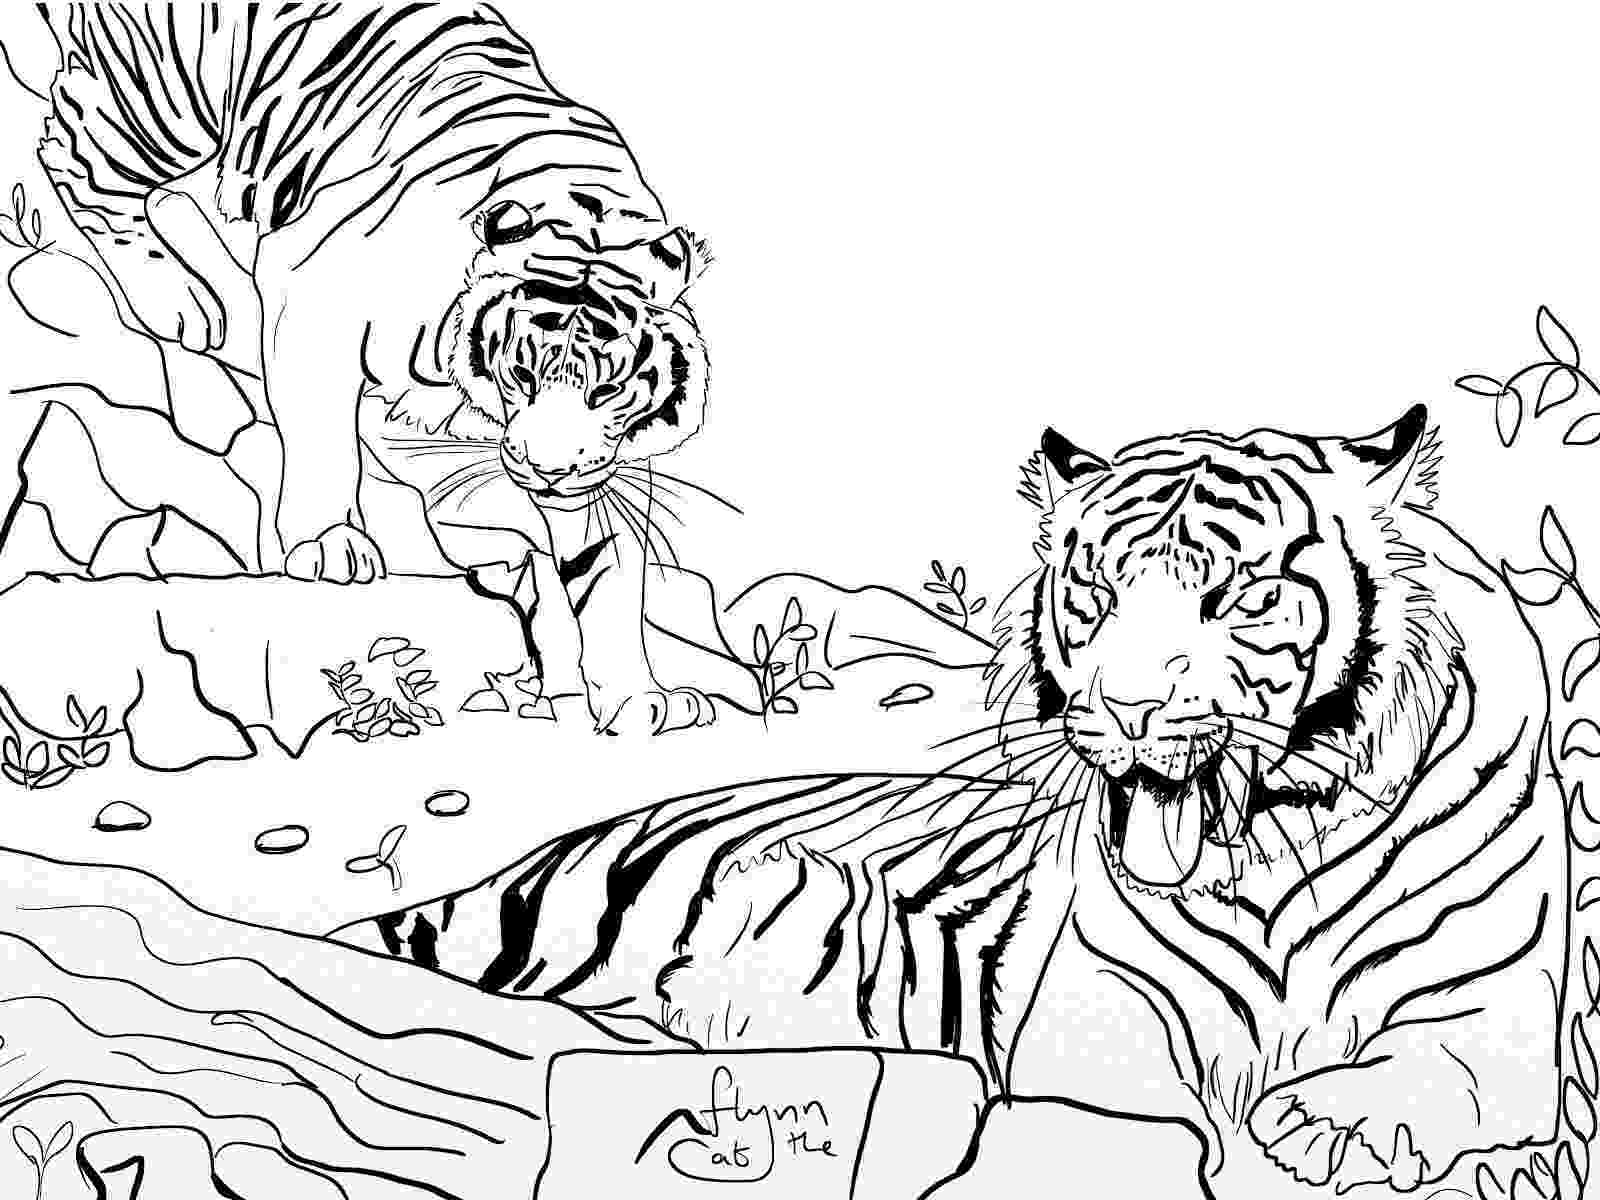 coloring pictures of tigers tigers wildlife colouring page colouring page art coloring pictures of tigers 